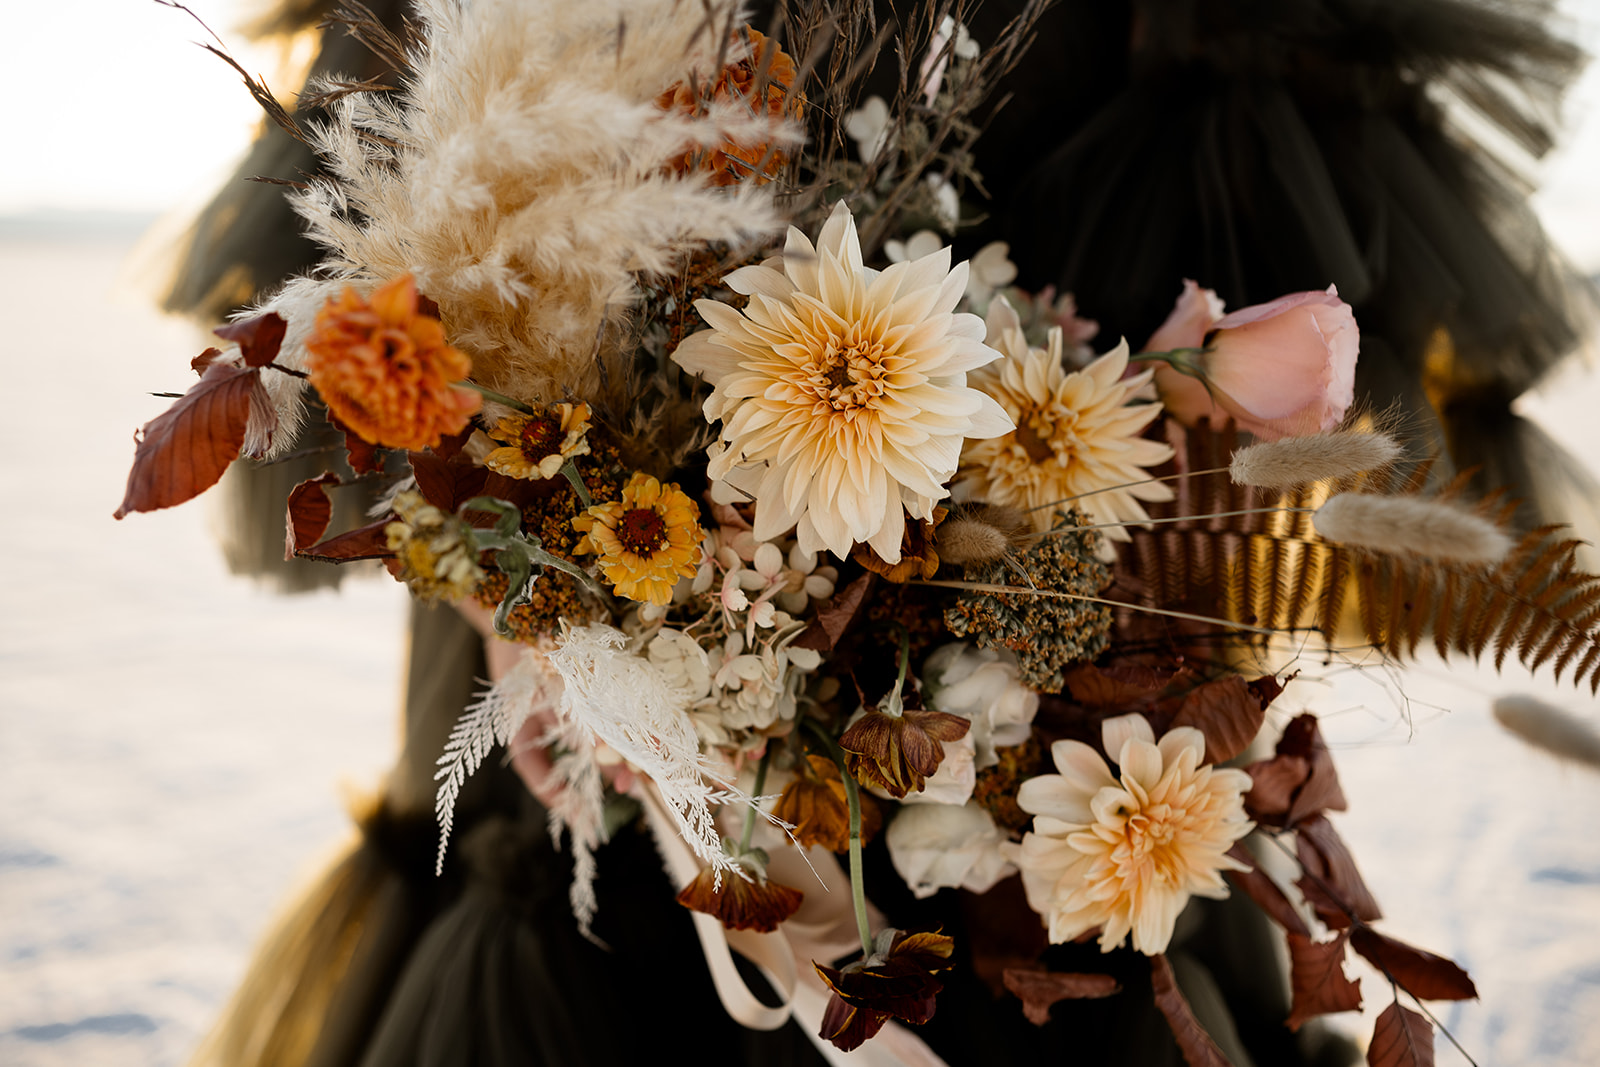 Close-up of a detailed floral bouquet with white, peach, and dark flowers, set against a dark background